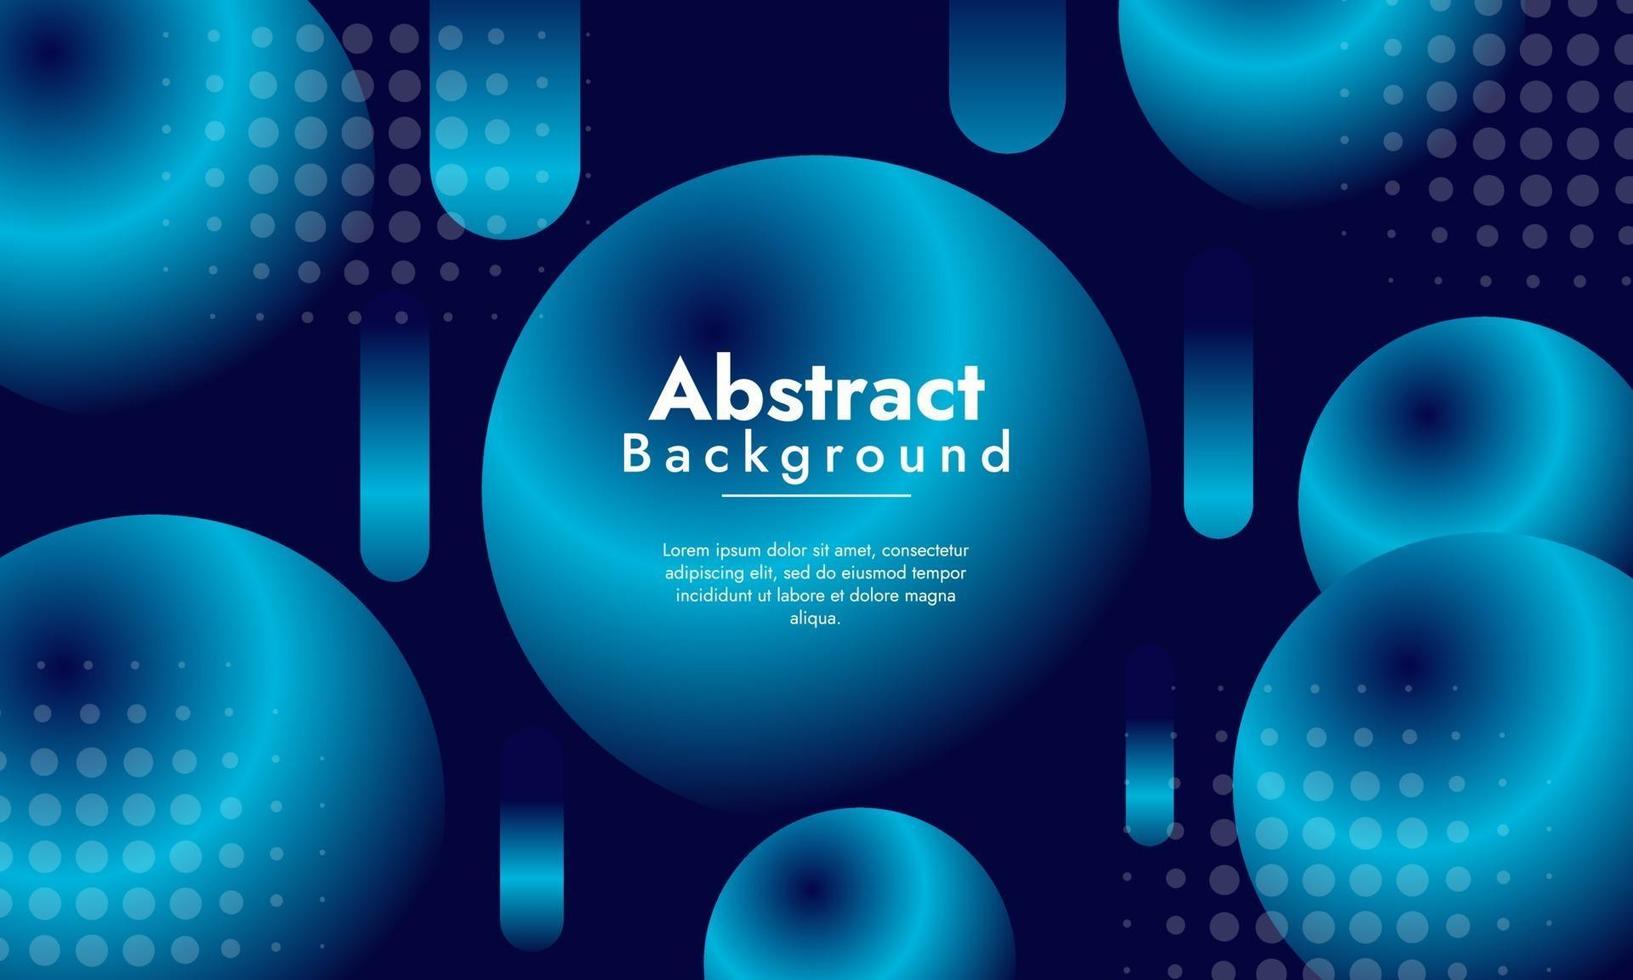 Abstract background with blue gradient geometric shapes vector